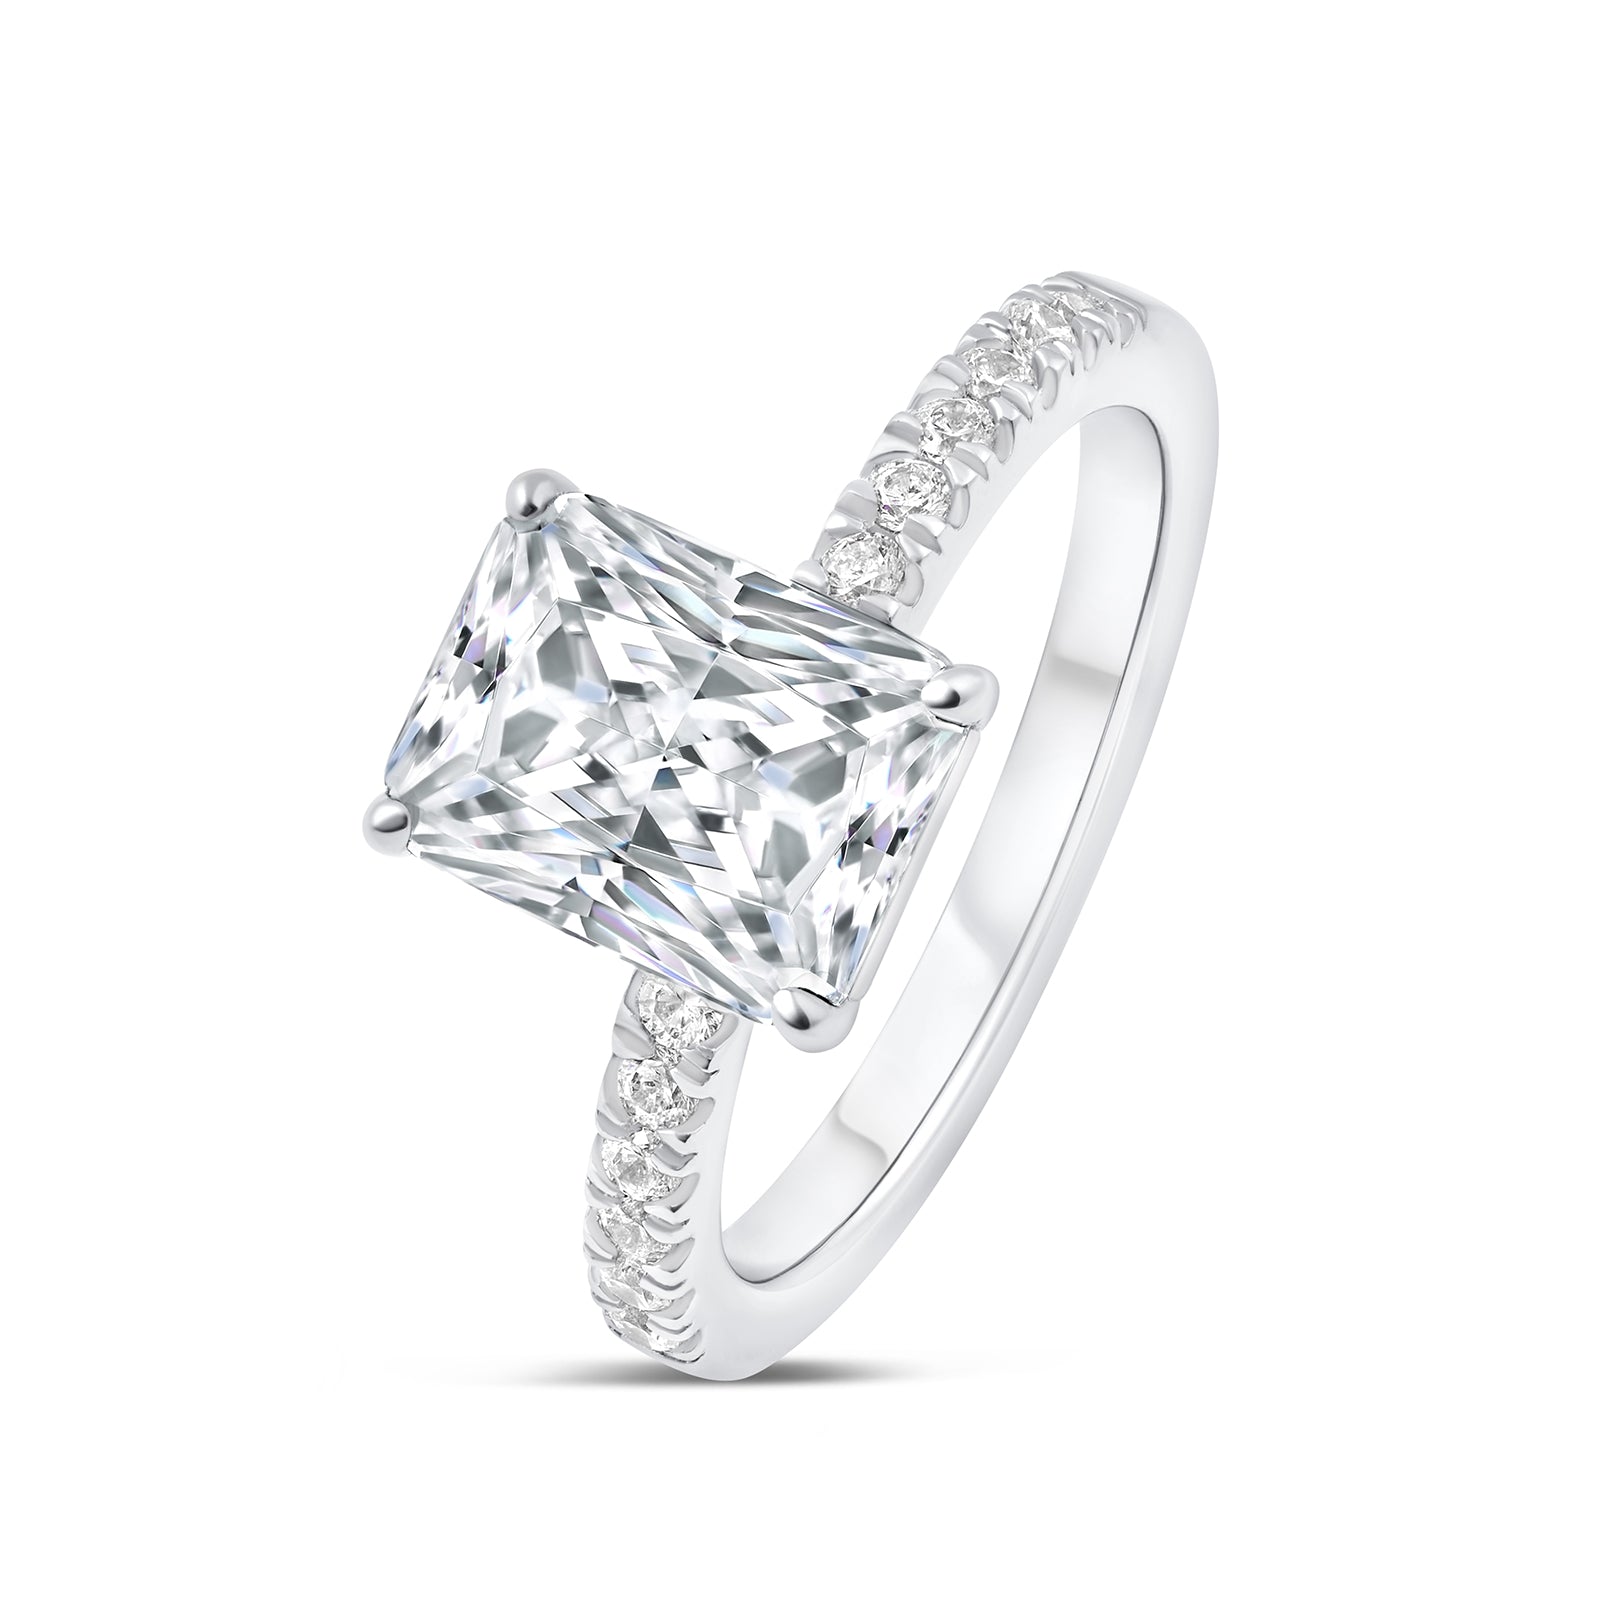 Classic 3 carat radiant cut engagement ring with half eternity band detailing tilted to its side